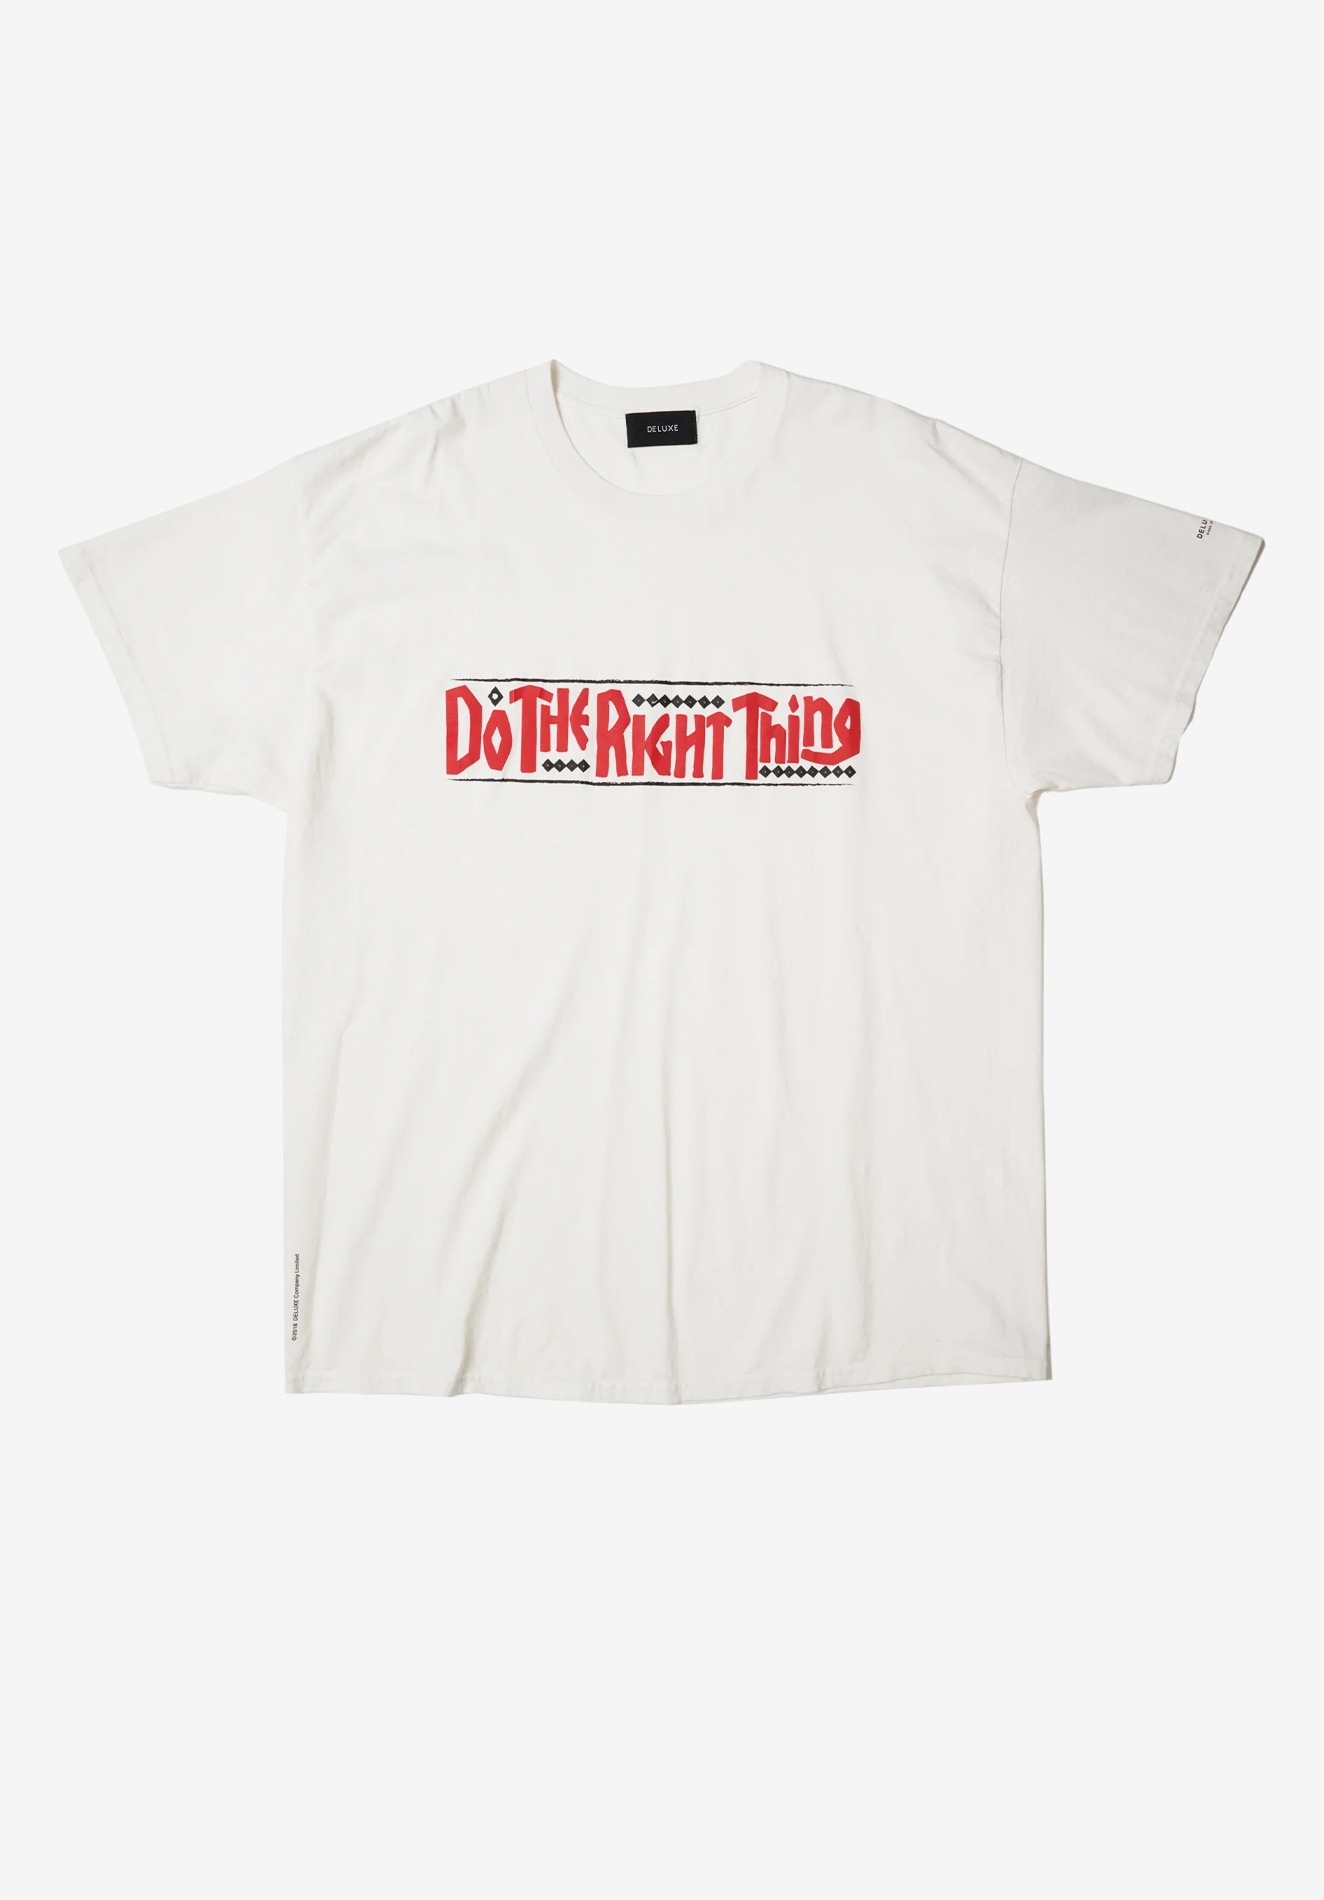 Do the right thing x DELUXE TEE, WHITE